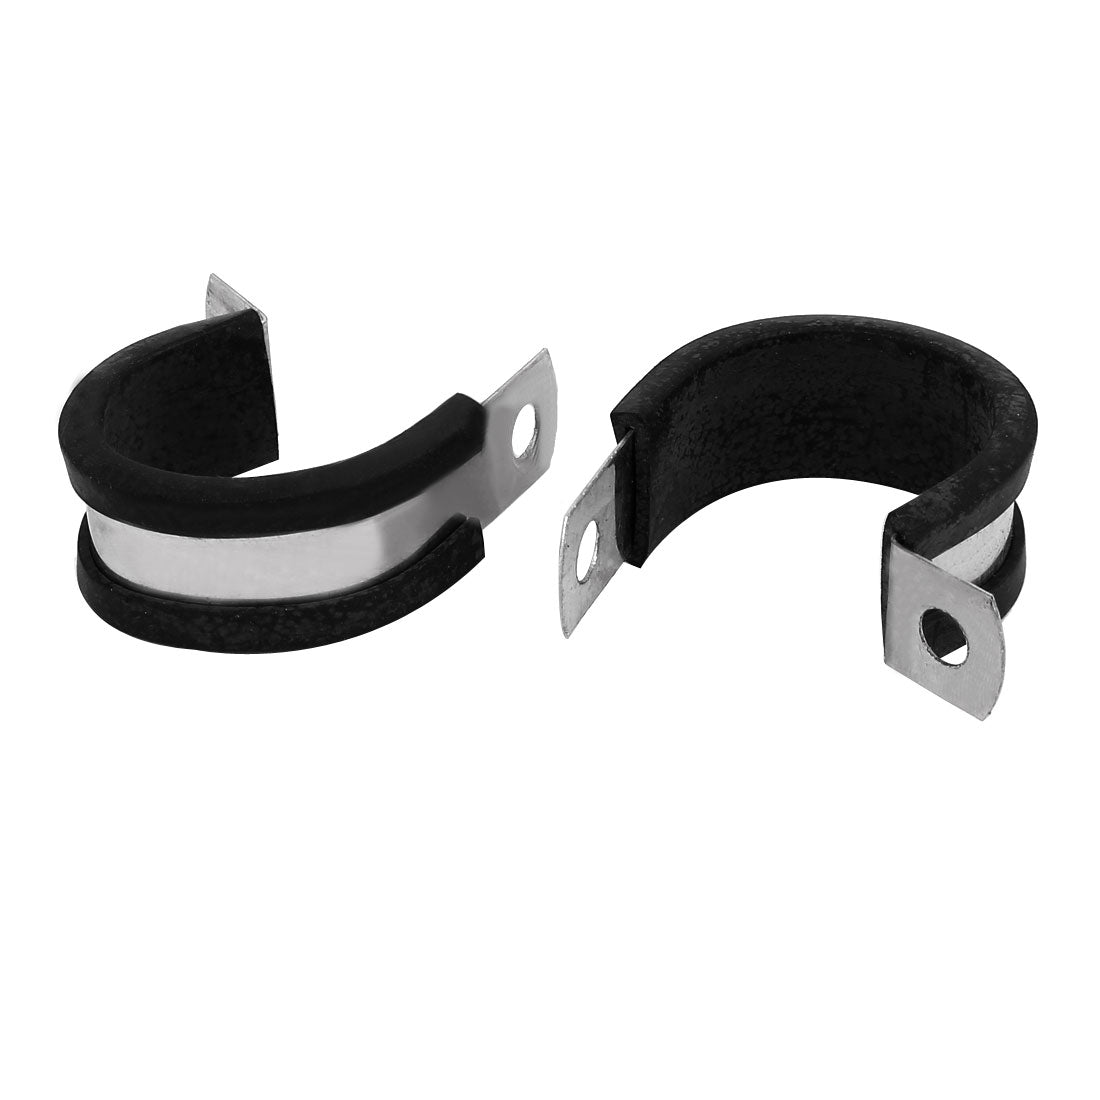 uxcell Uxcell 25mm Dia EPDM Rubber Lined P Clips Cable Hose Pipe Clamps Holder 2pcs